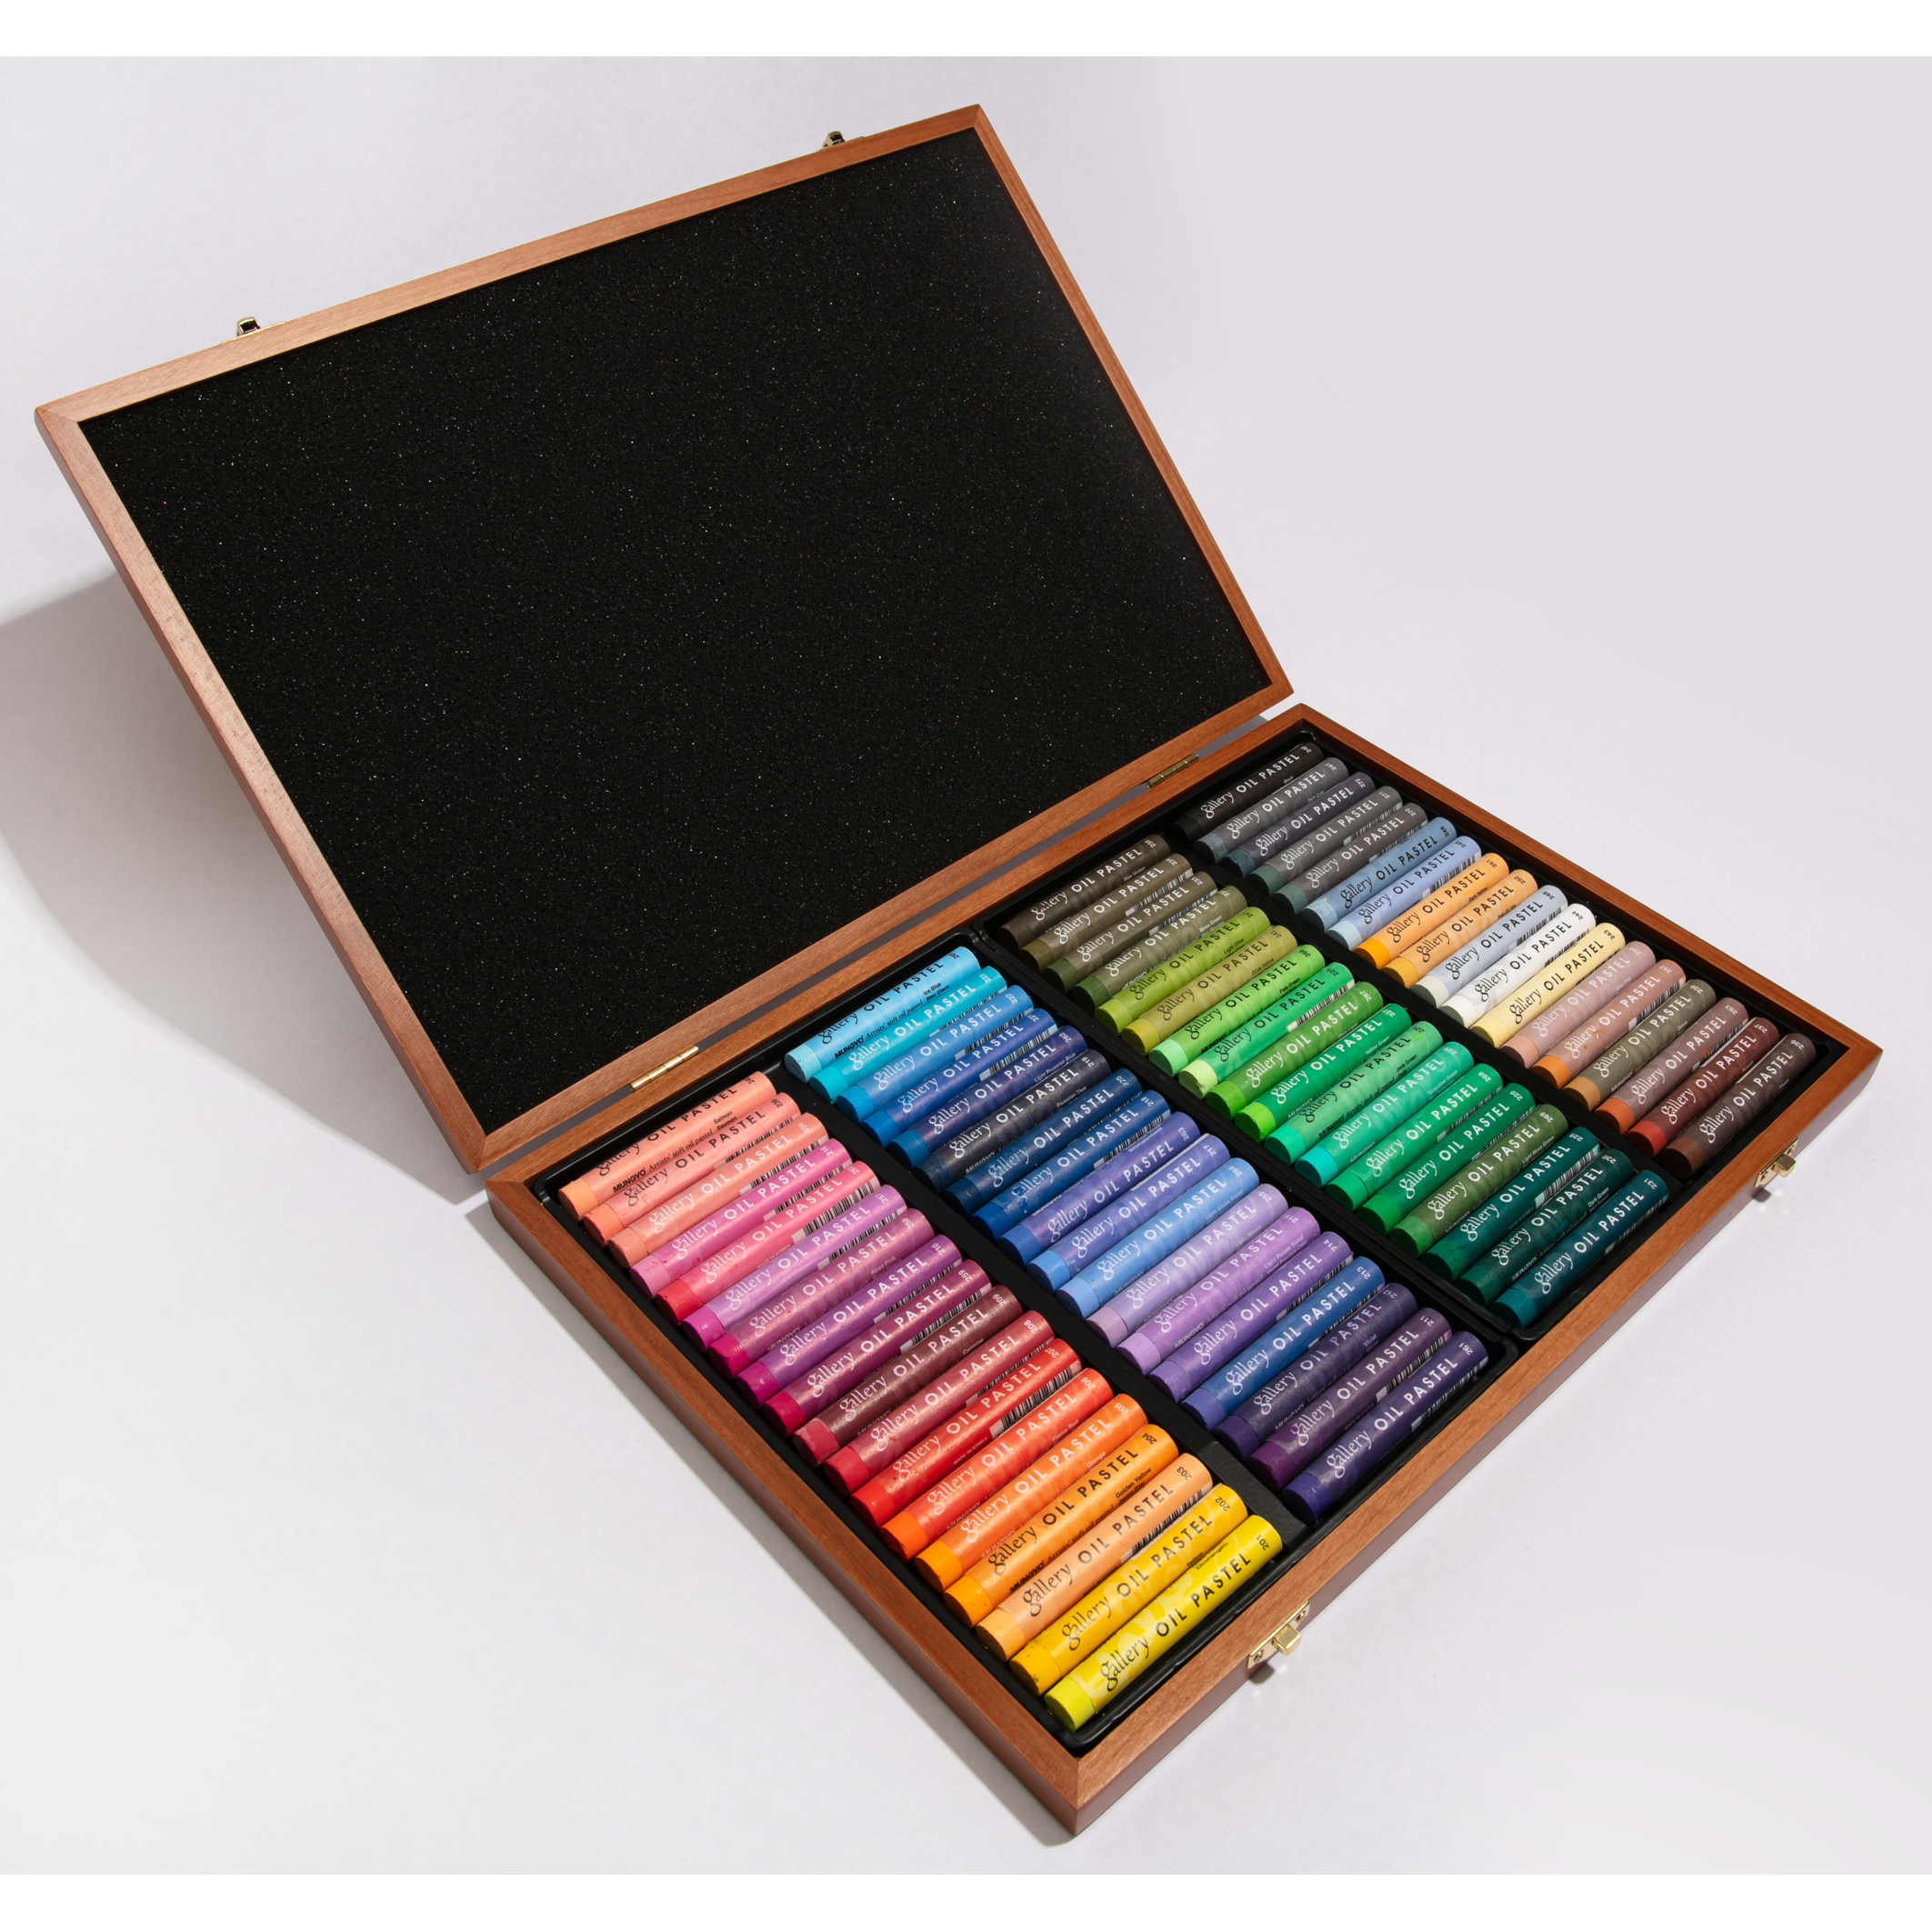 The Mungyo Gallery Artist Soft Pastels - Set 72 in Wooden Box 569